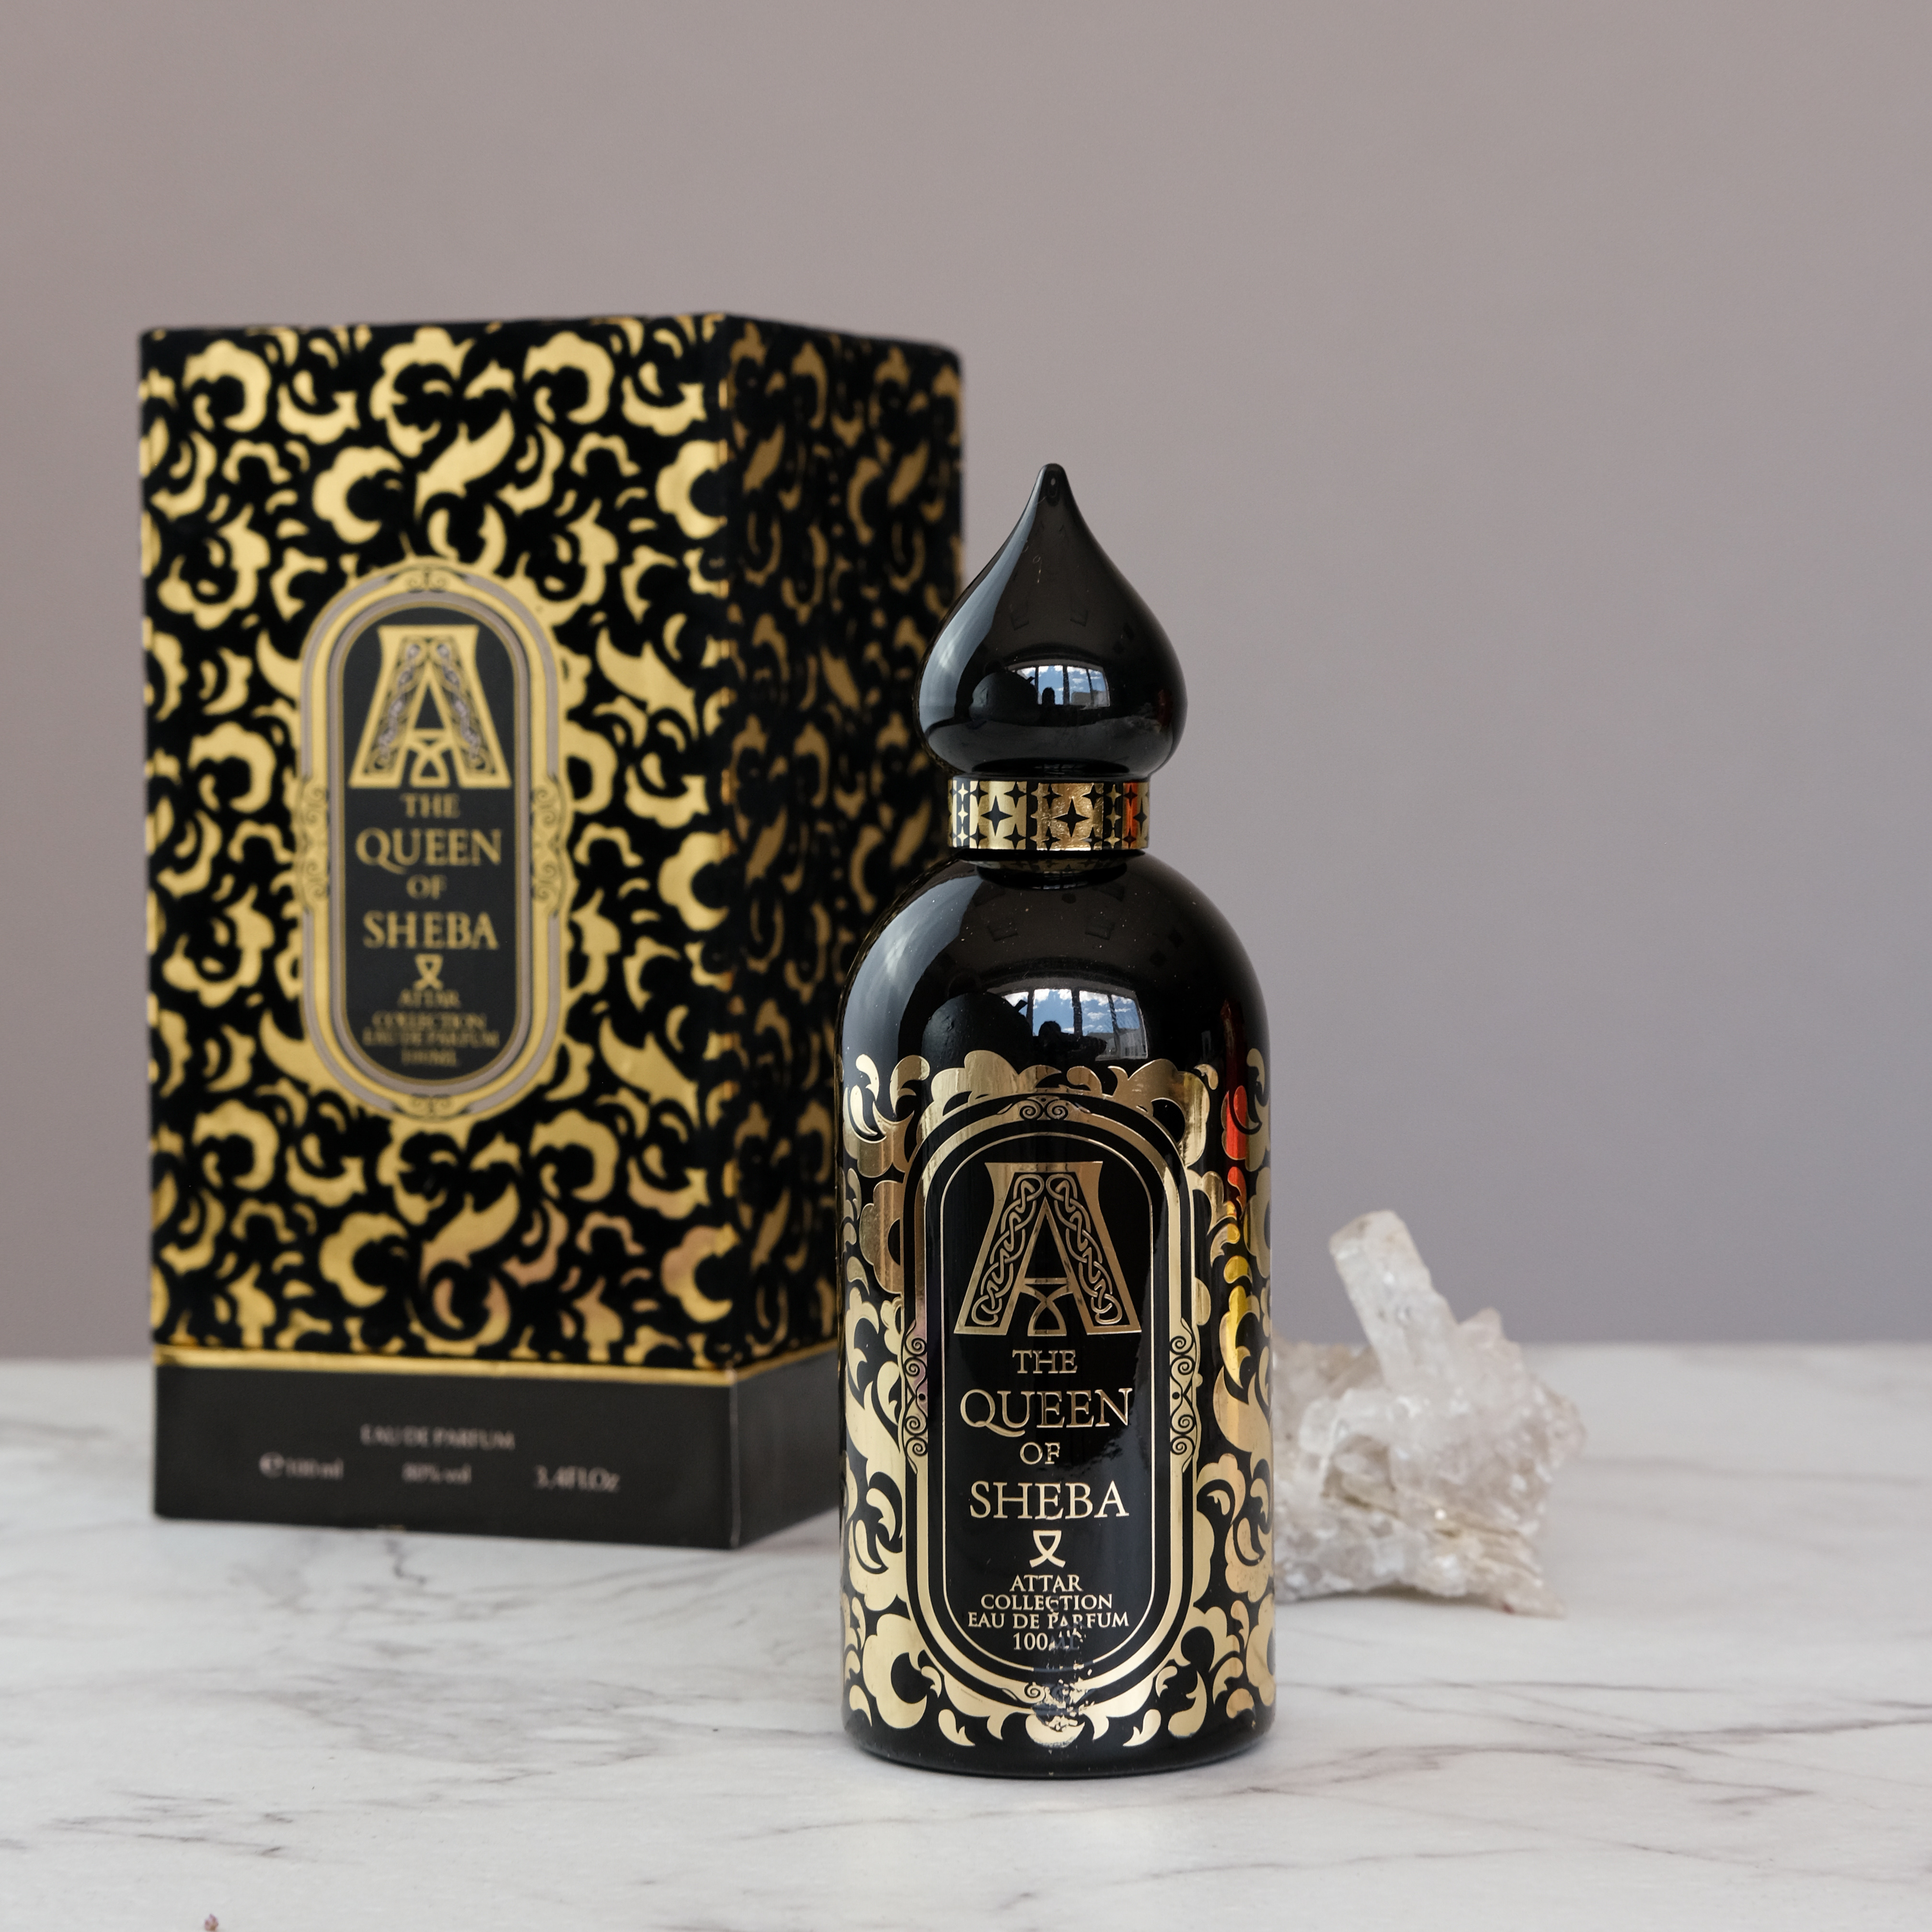 Collection the queen of sheba. Духи Attar Queen of Sheba. Парфюмерная вода Attar collection the Queen of Sheba. Attar collection the Queen of Sheba 100 мл. Attar collection the Queen of Sheba женские.